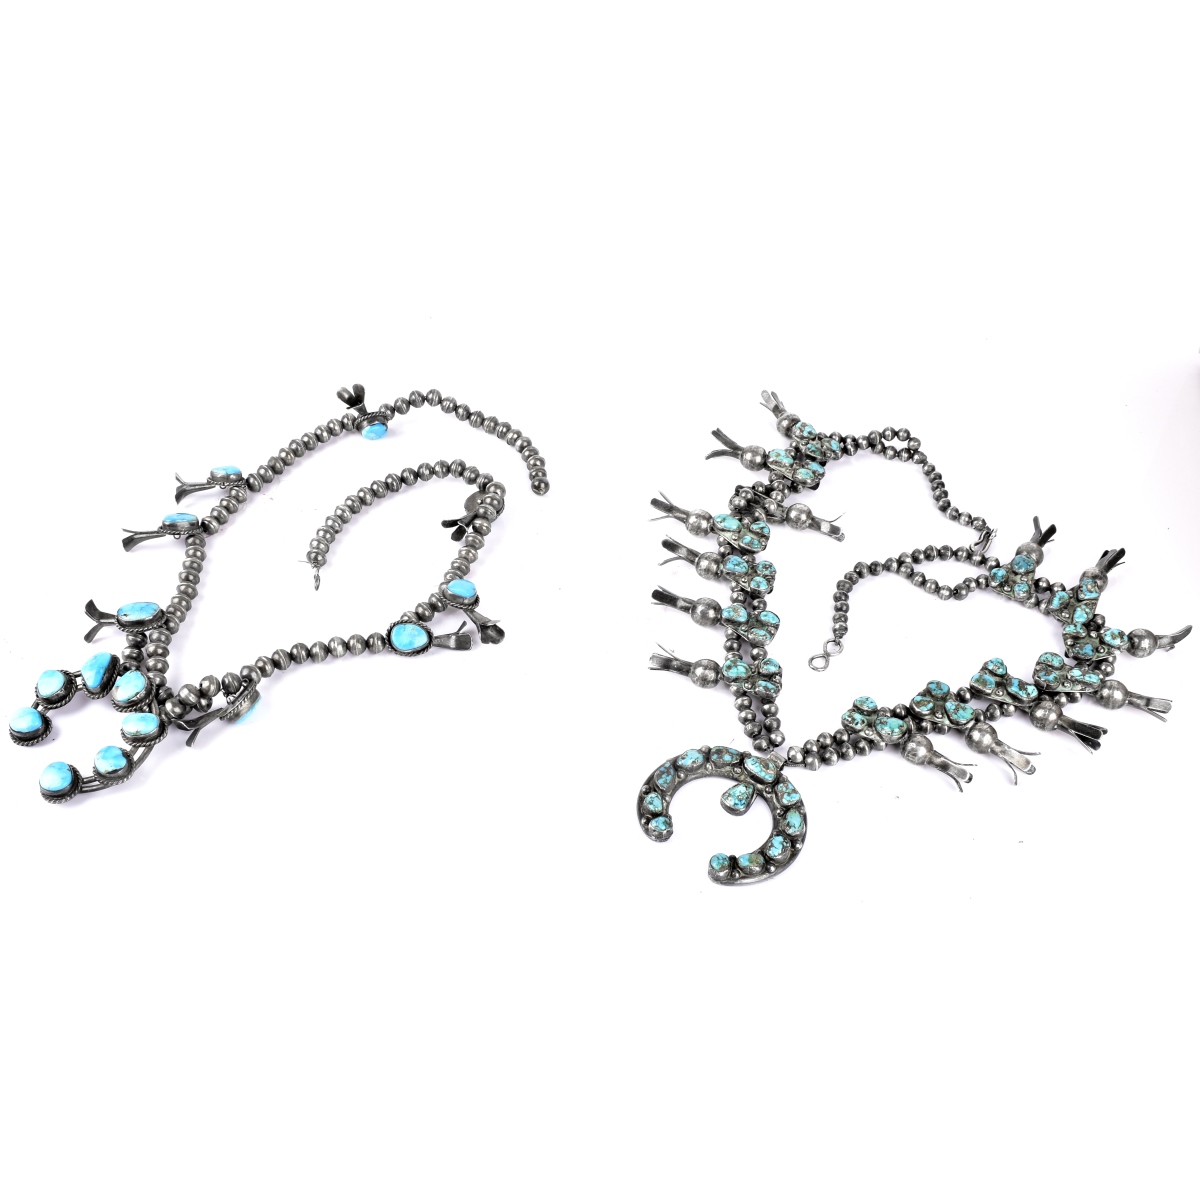 Two (2) Silver Turquoise Squash Blossom Necklaces